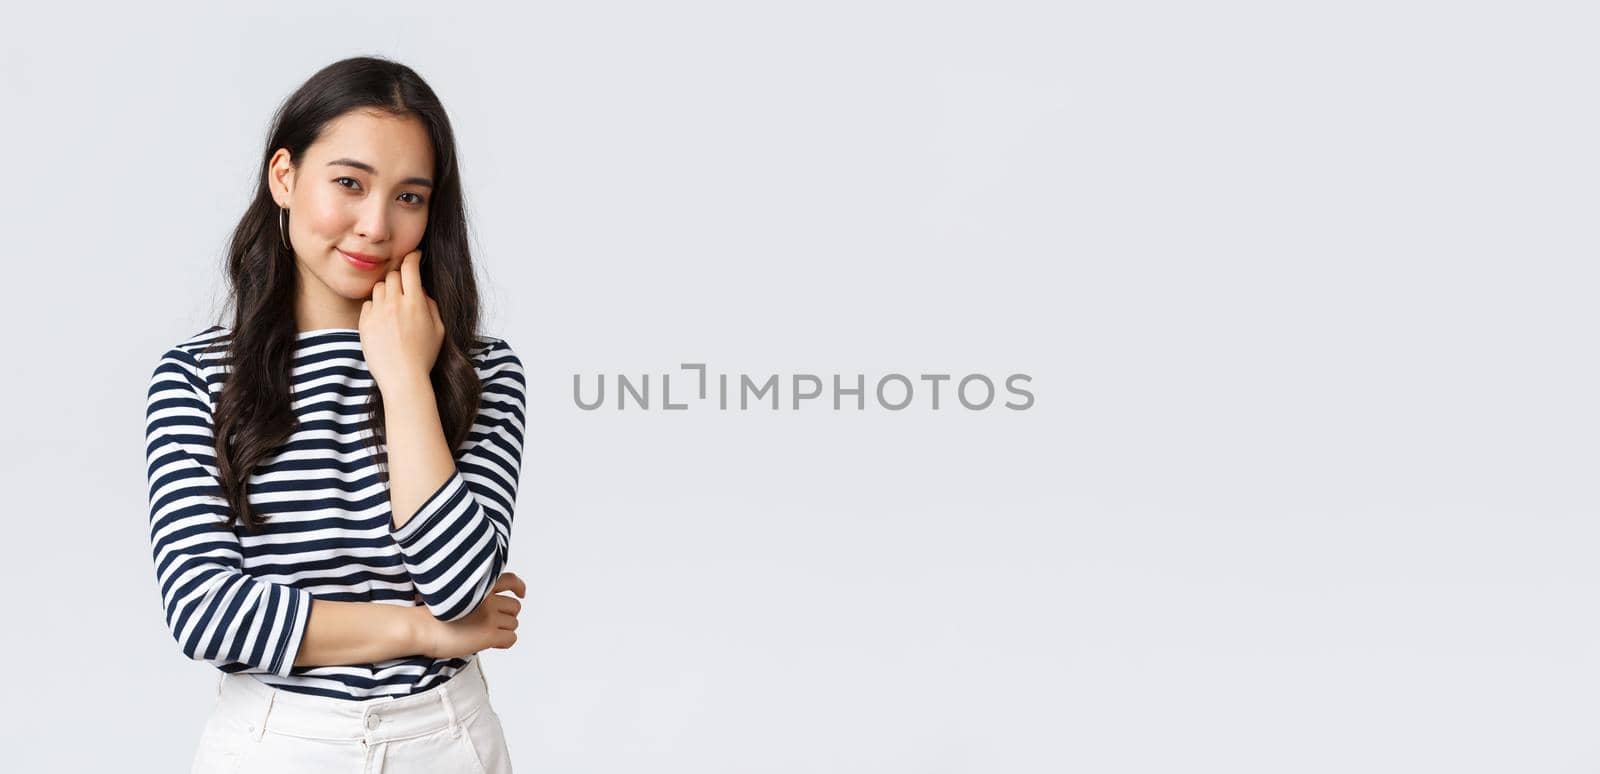 Lifestyle, people emotions and casual concept. Gorgeous smiling young asian woman lean on palm gently looking camera, listening to conversation, standing white background.